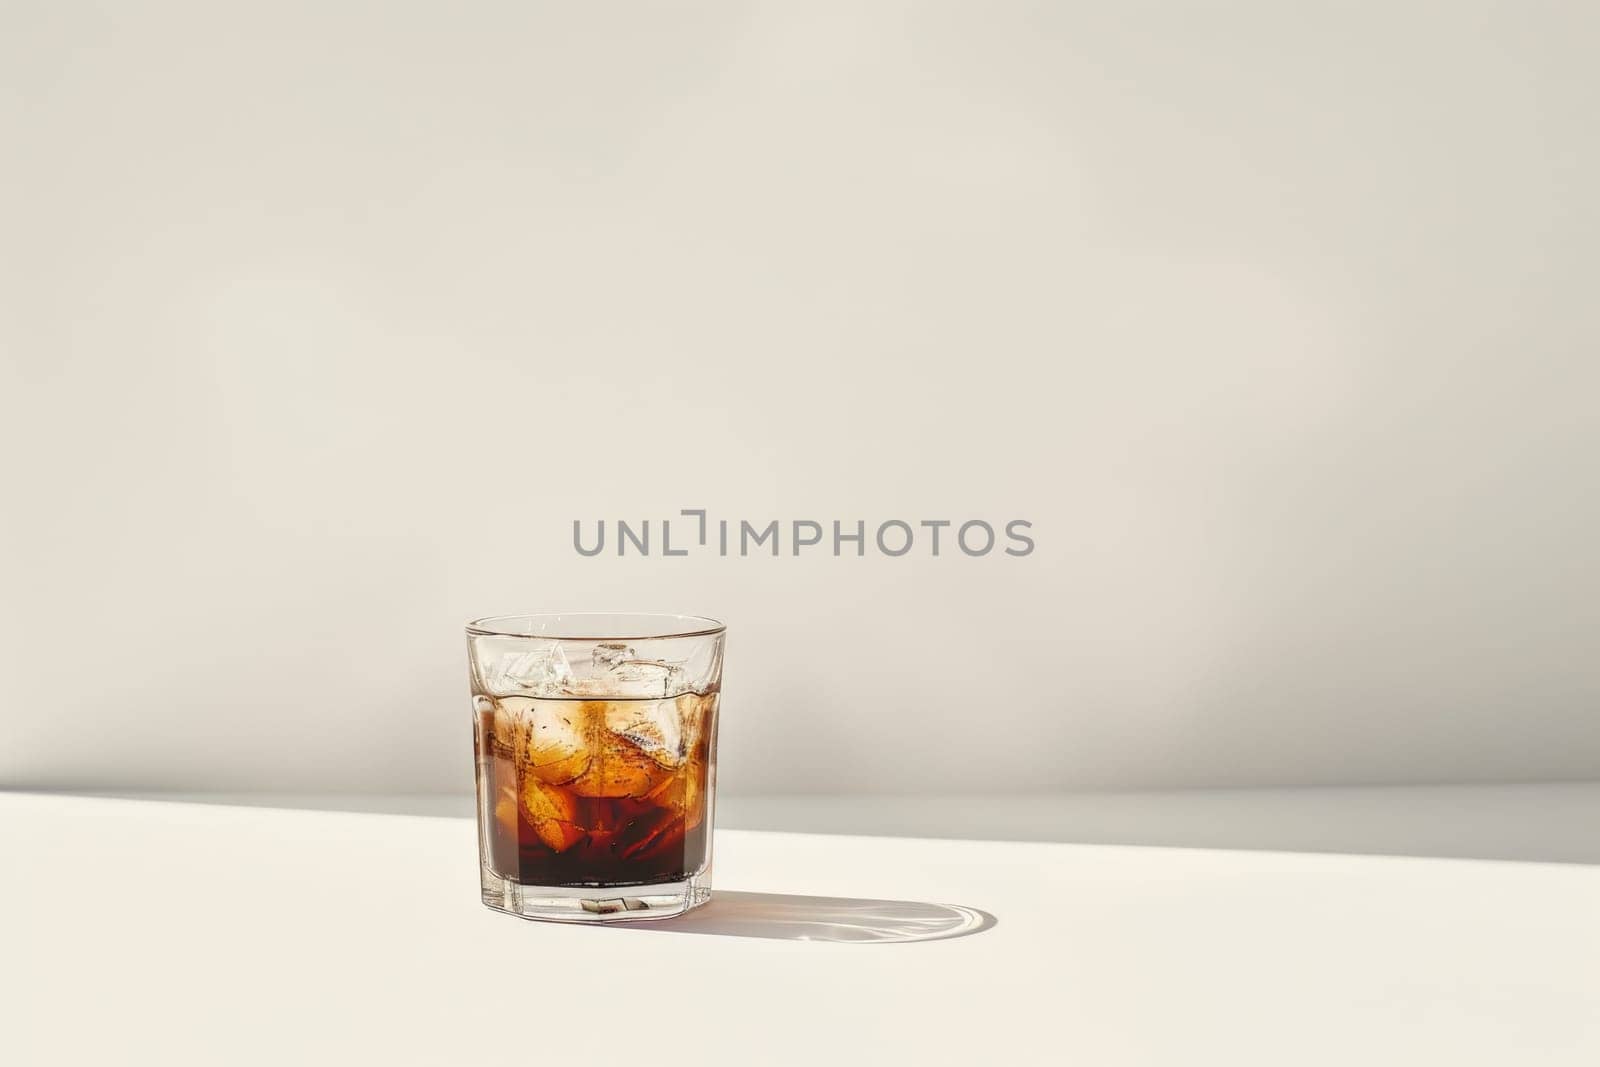 A glass of iced black coffee on white background and Clean composition, minimal style.